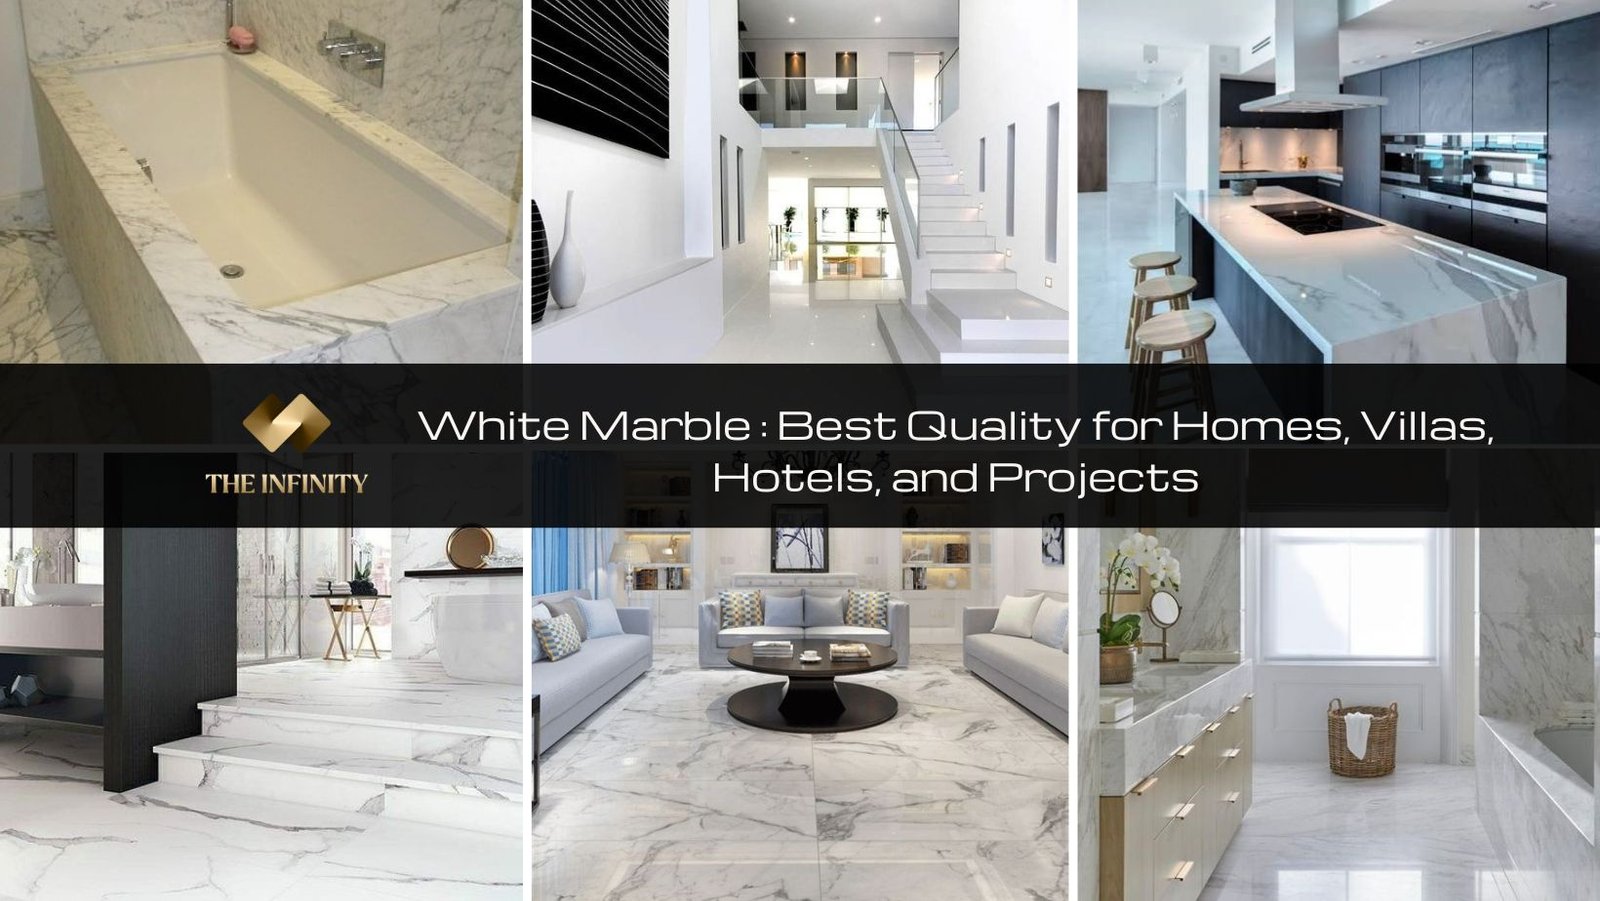 White Marble : Best Quality for Homes, Villas, Hotels, and Projects